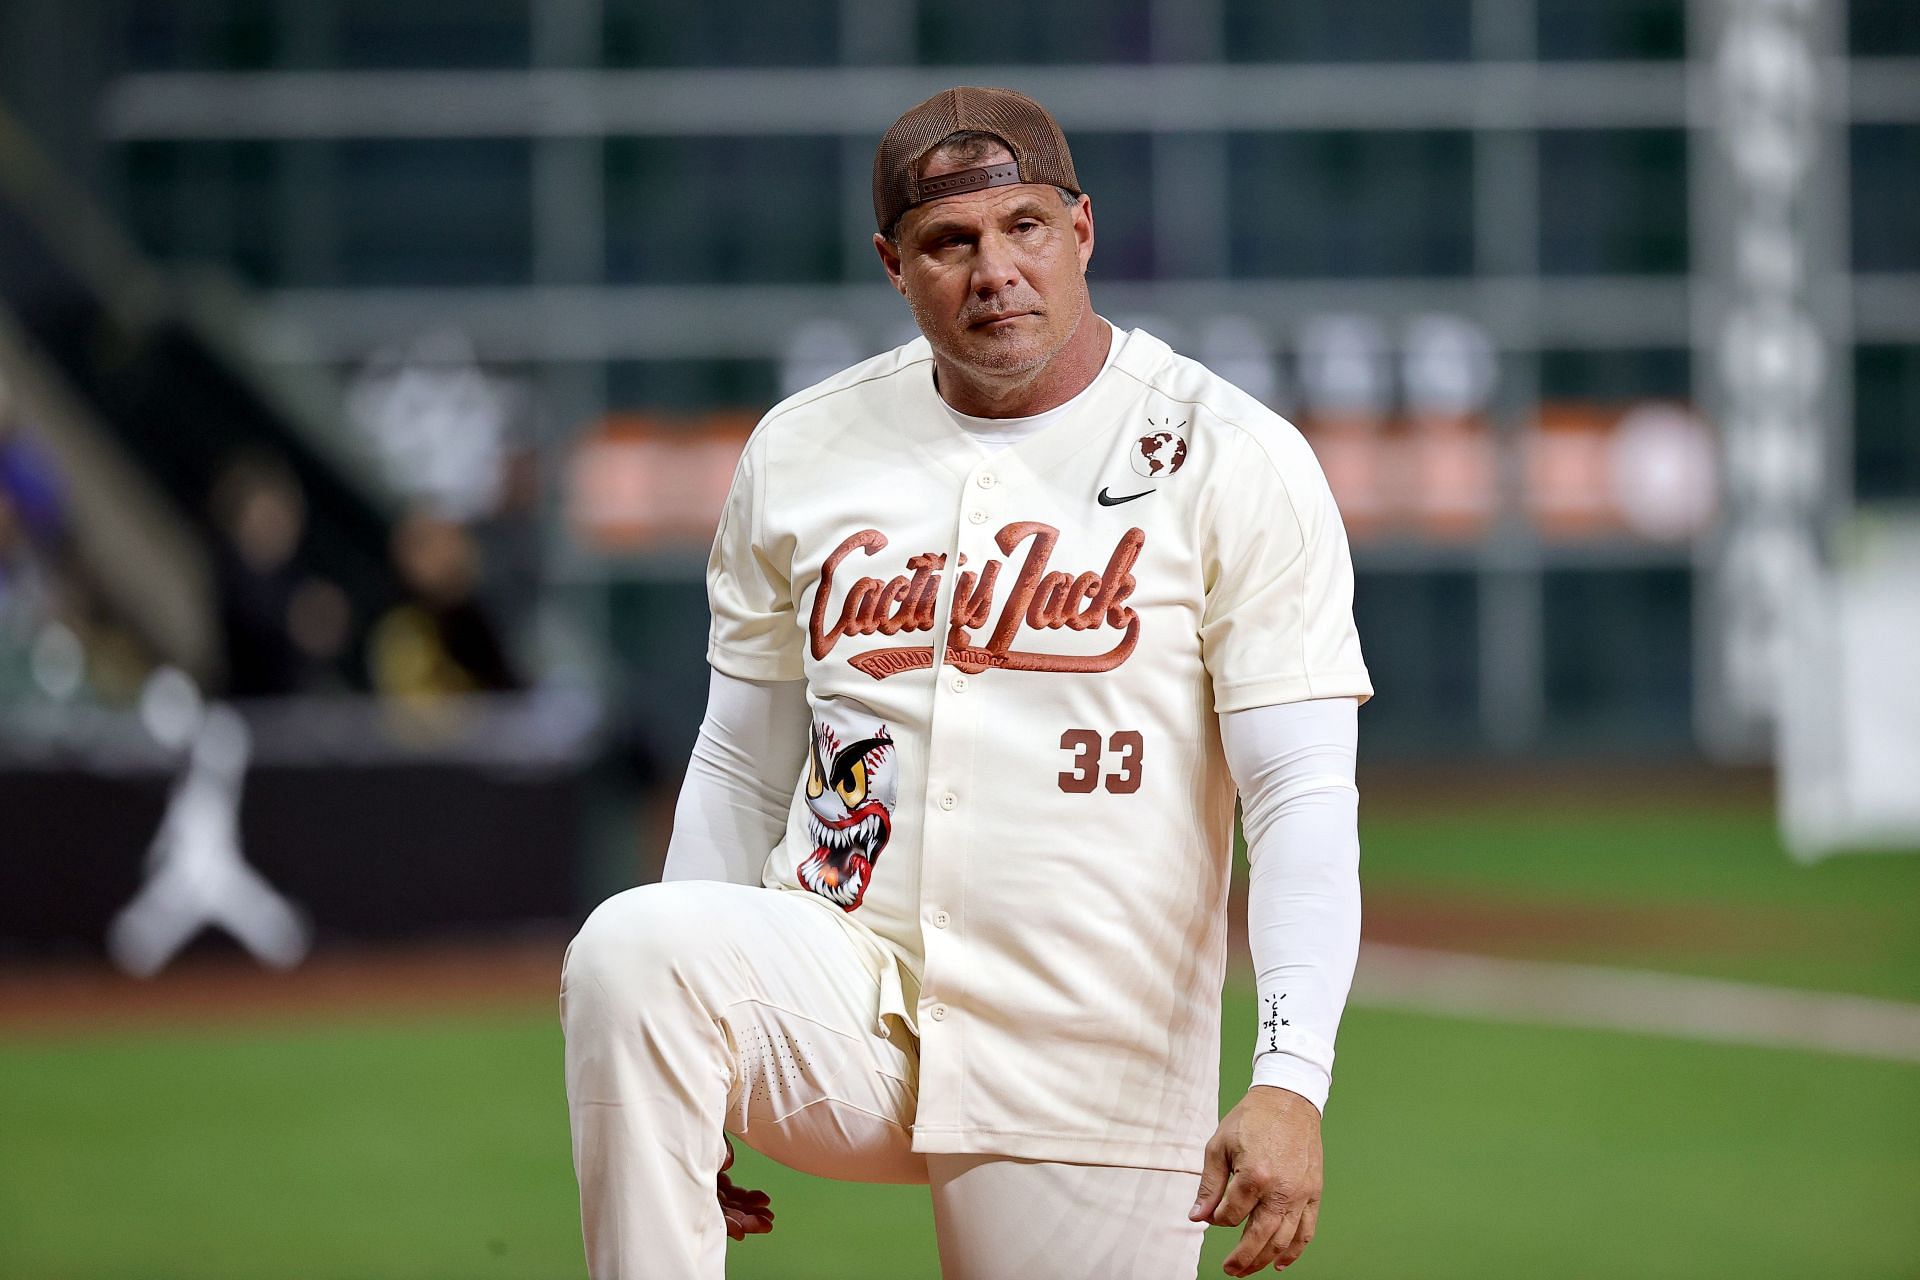 When former Oakland Athletics star Jose Canseco unleashed fury on